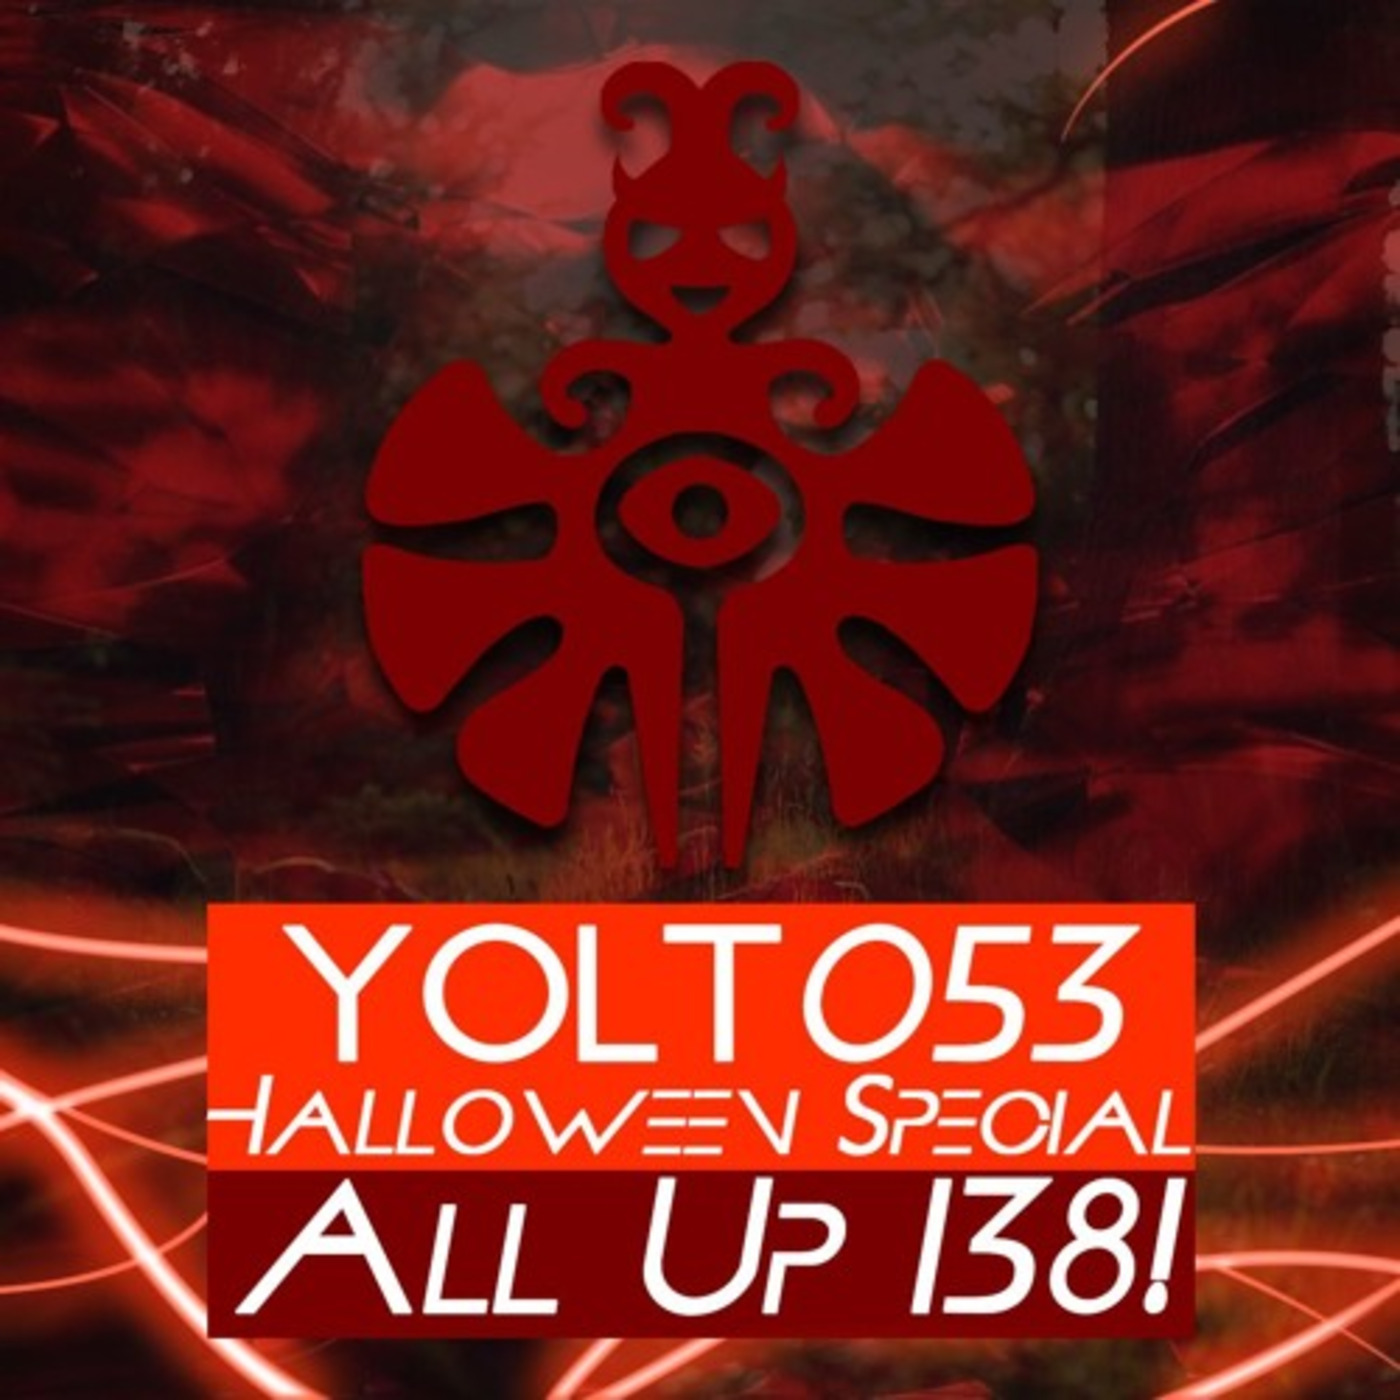 You Only Live Trance Episode 053 (#YOLT053) - Ness [Halloween All Up 138! Special]